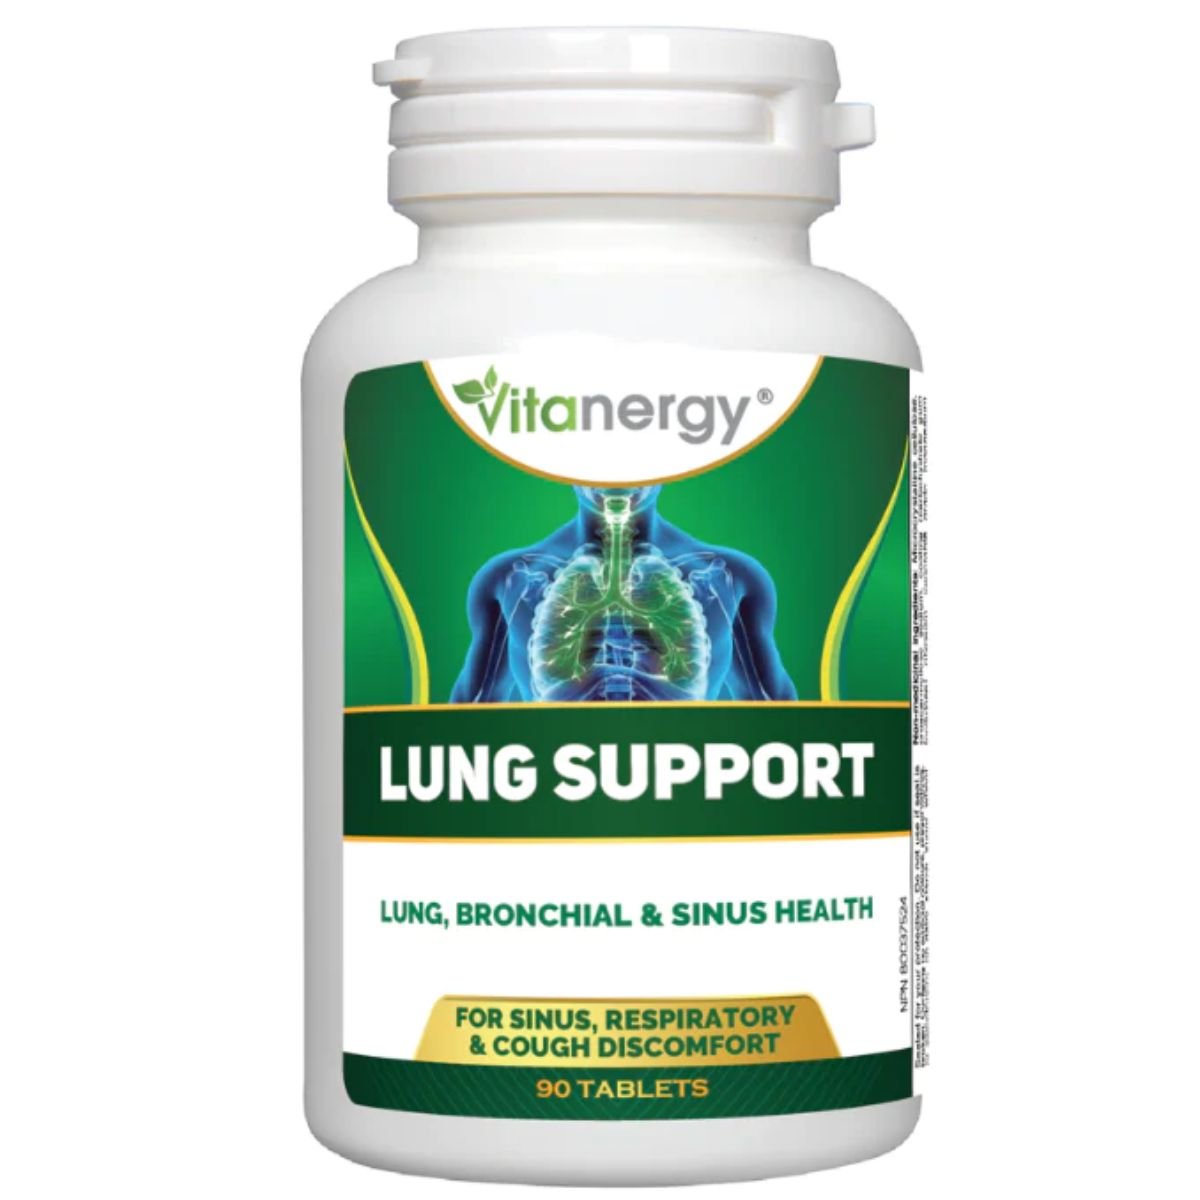 Vitanergy LUNG SUPPORT - Lung, Bronchial & Sinus Health, 90 Tablets - SupplementSource.ca